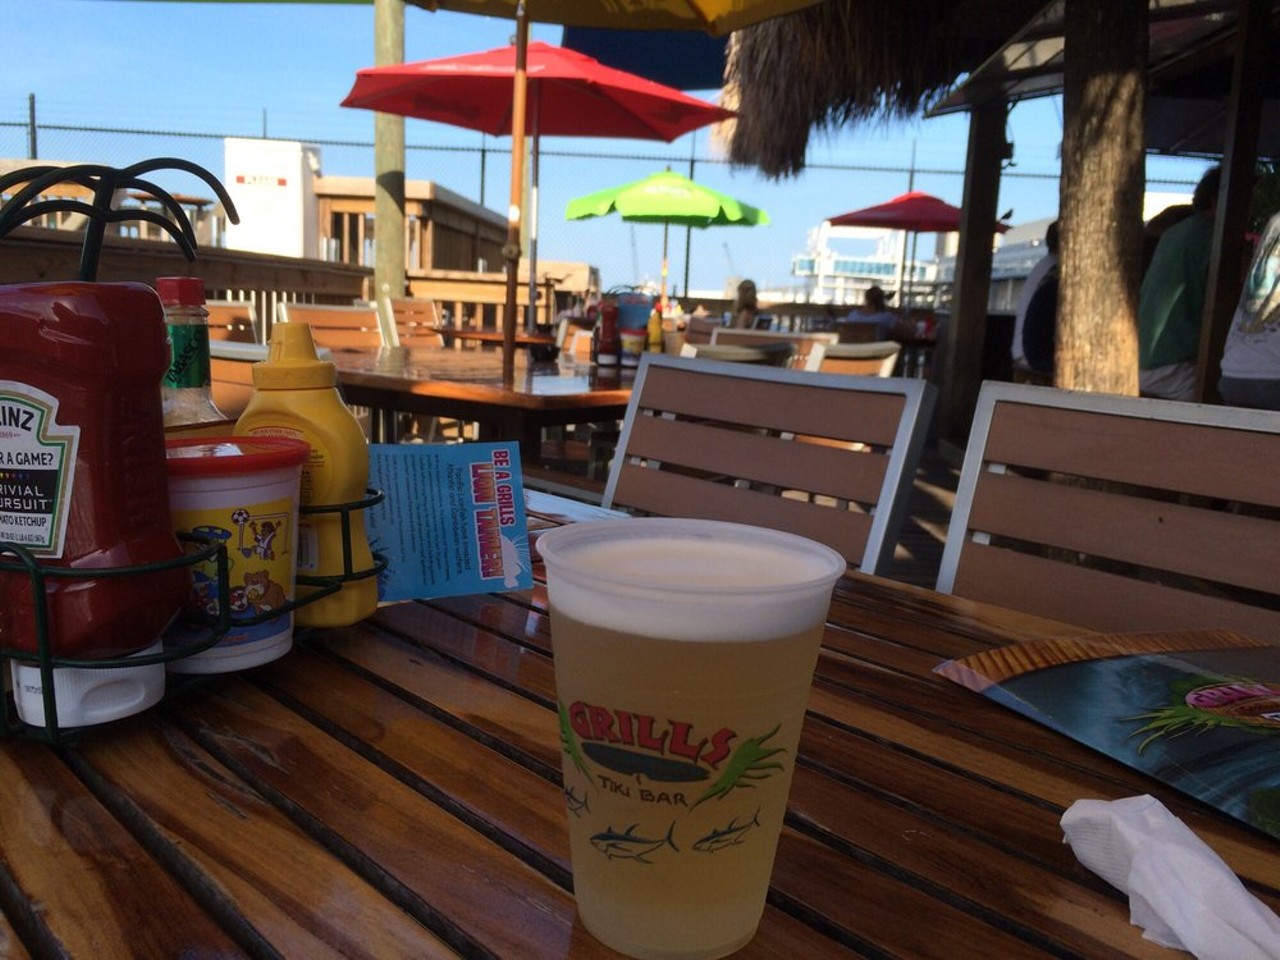 Grills Seafood Deck and Tiki Bar 
505 Glen Cheek Dr, Cape Canaveral, FL
Choosing to eat outside Grills Seafood Deck and Tiki Bar provides you with a beautiful view of the Sunrise Marina. They, of course, pride themselves on their fresh seafood, so that seems like a win-win situation.  
Photo via Michael N./Yelp